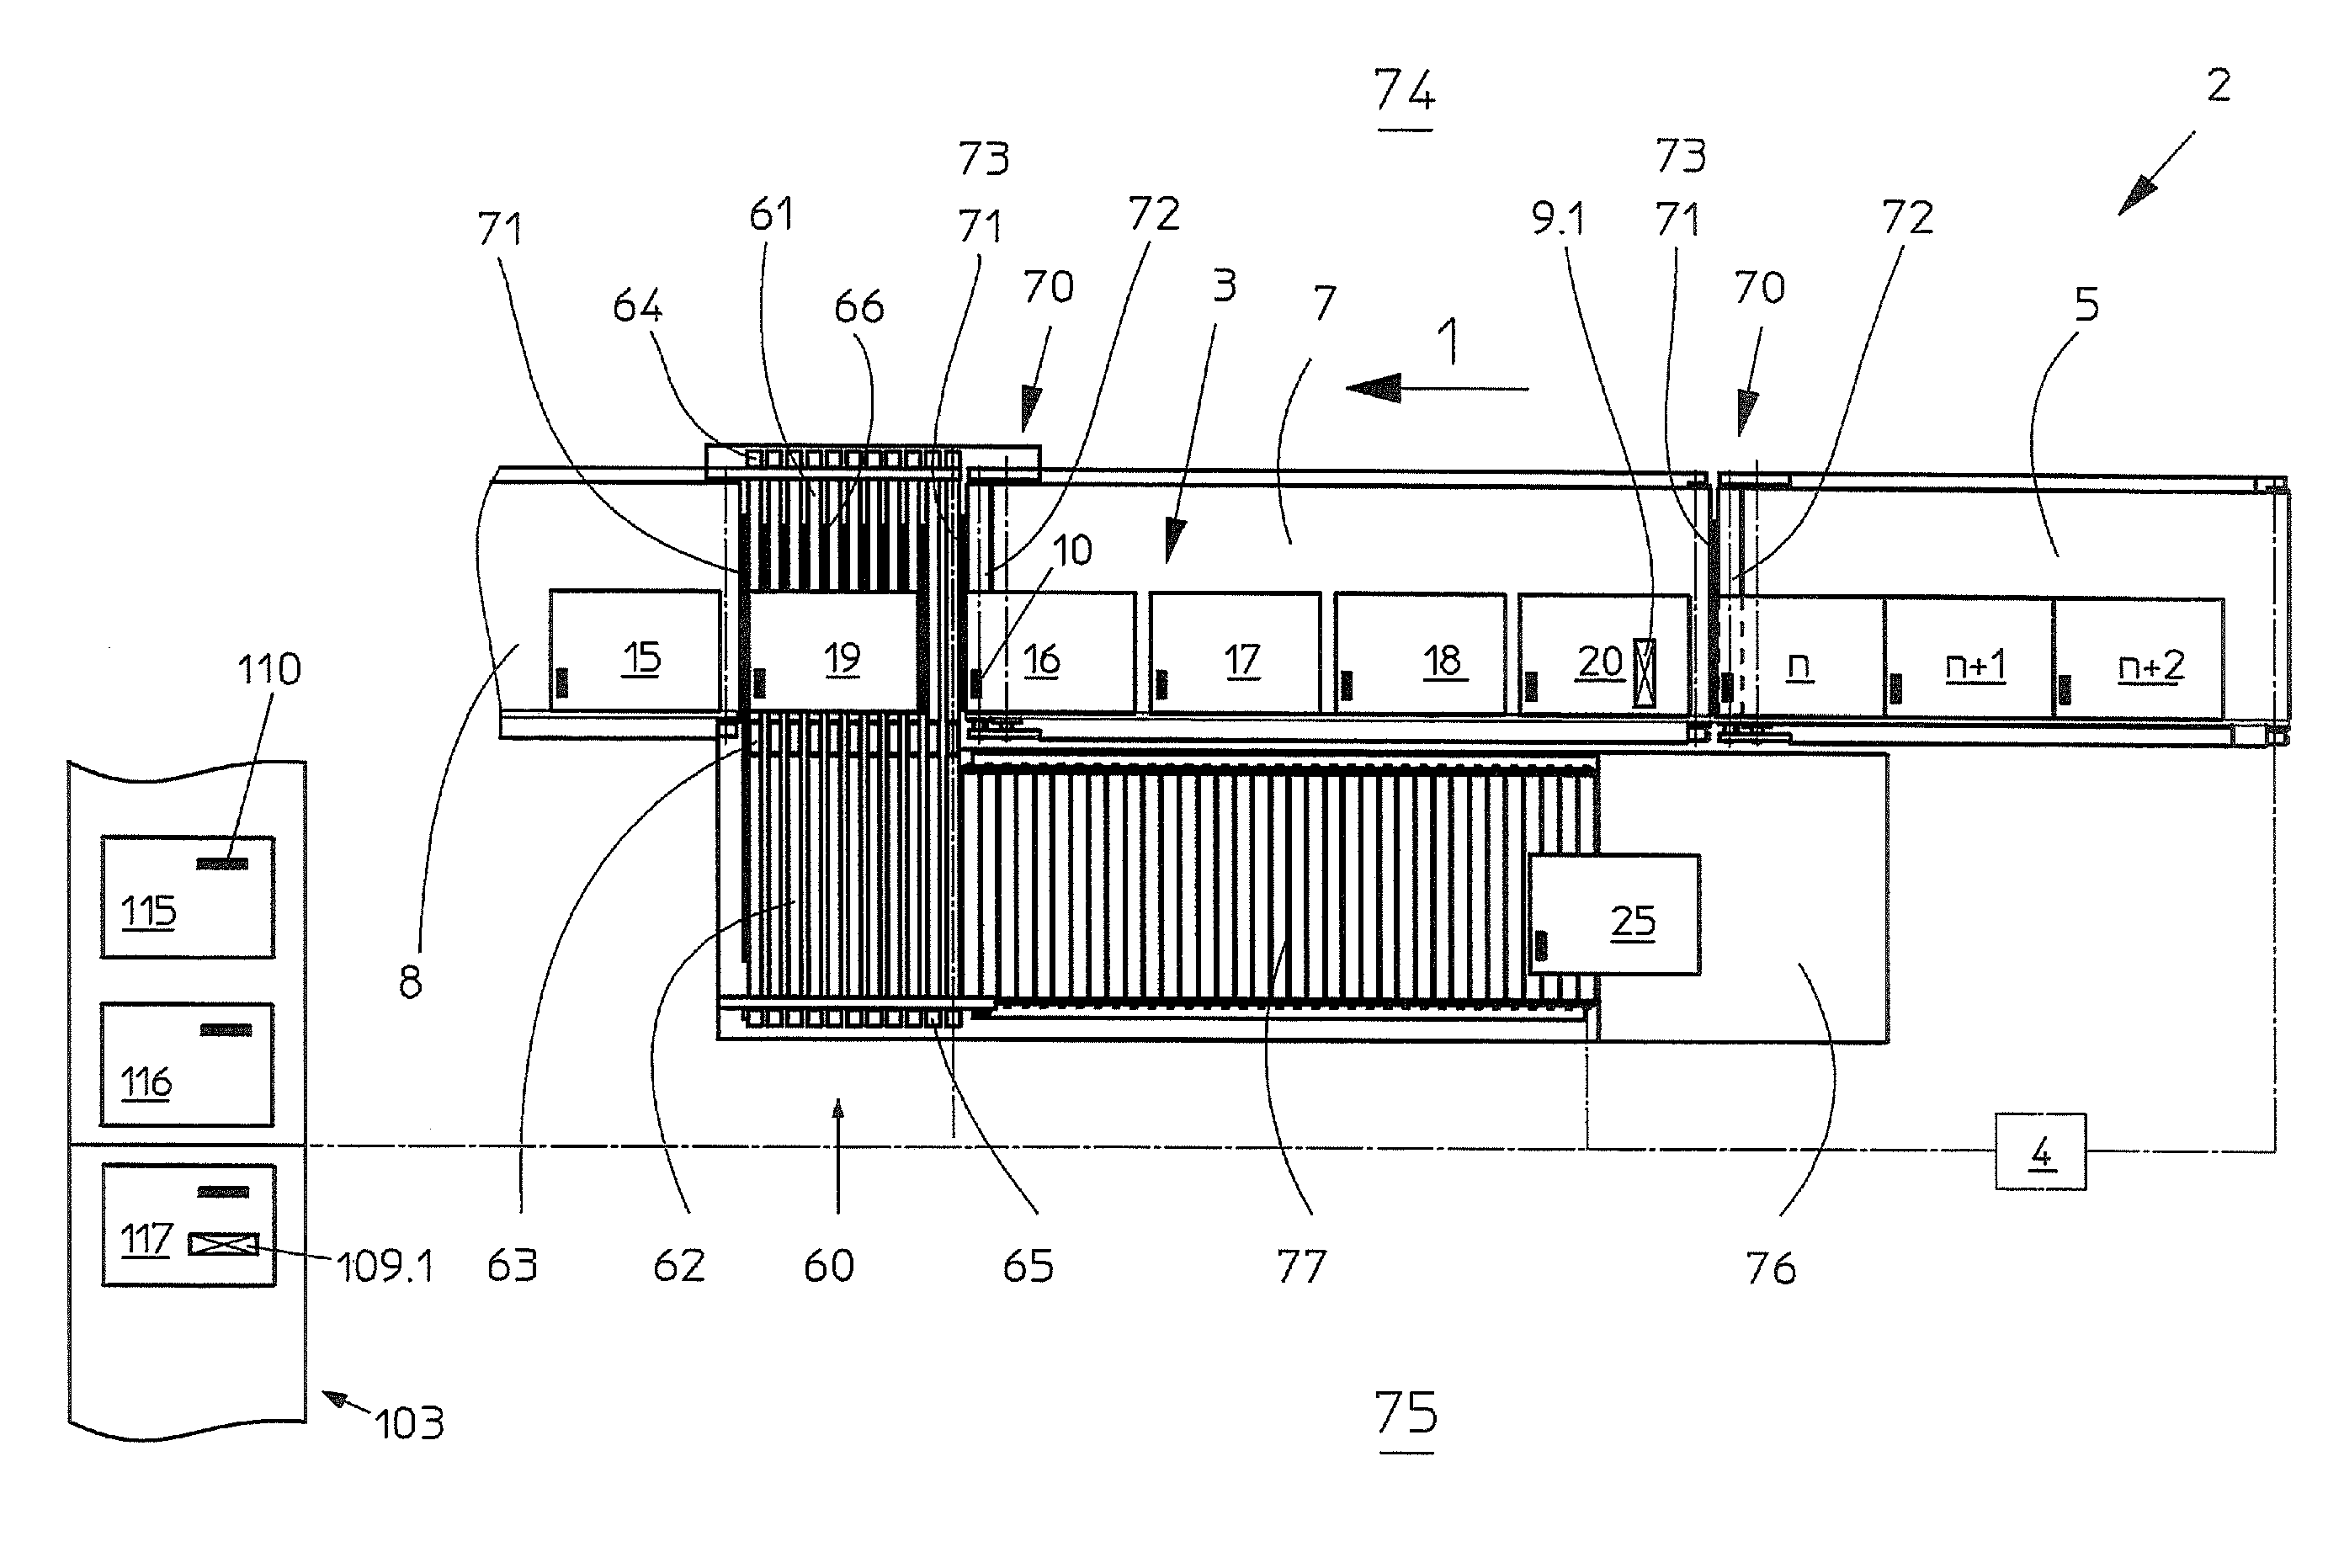 Method and device for removing at least one book block from and/or supplying at least one book to a conveying section of a book production line